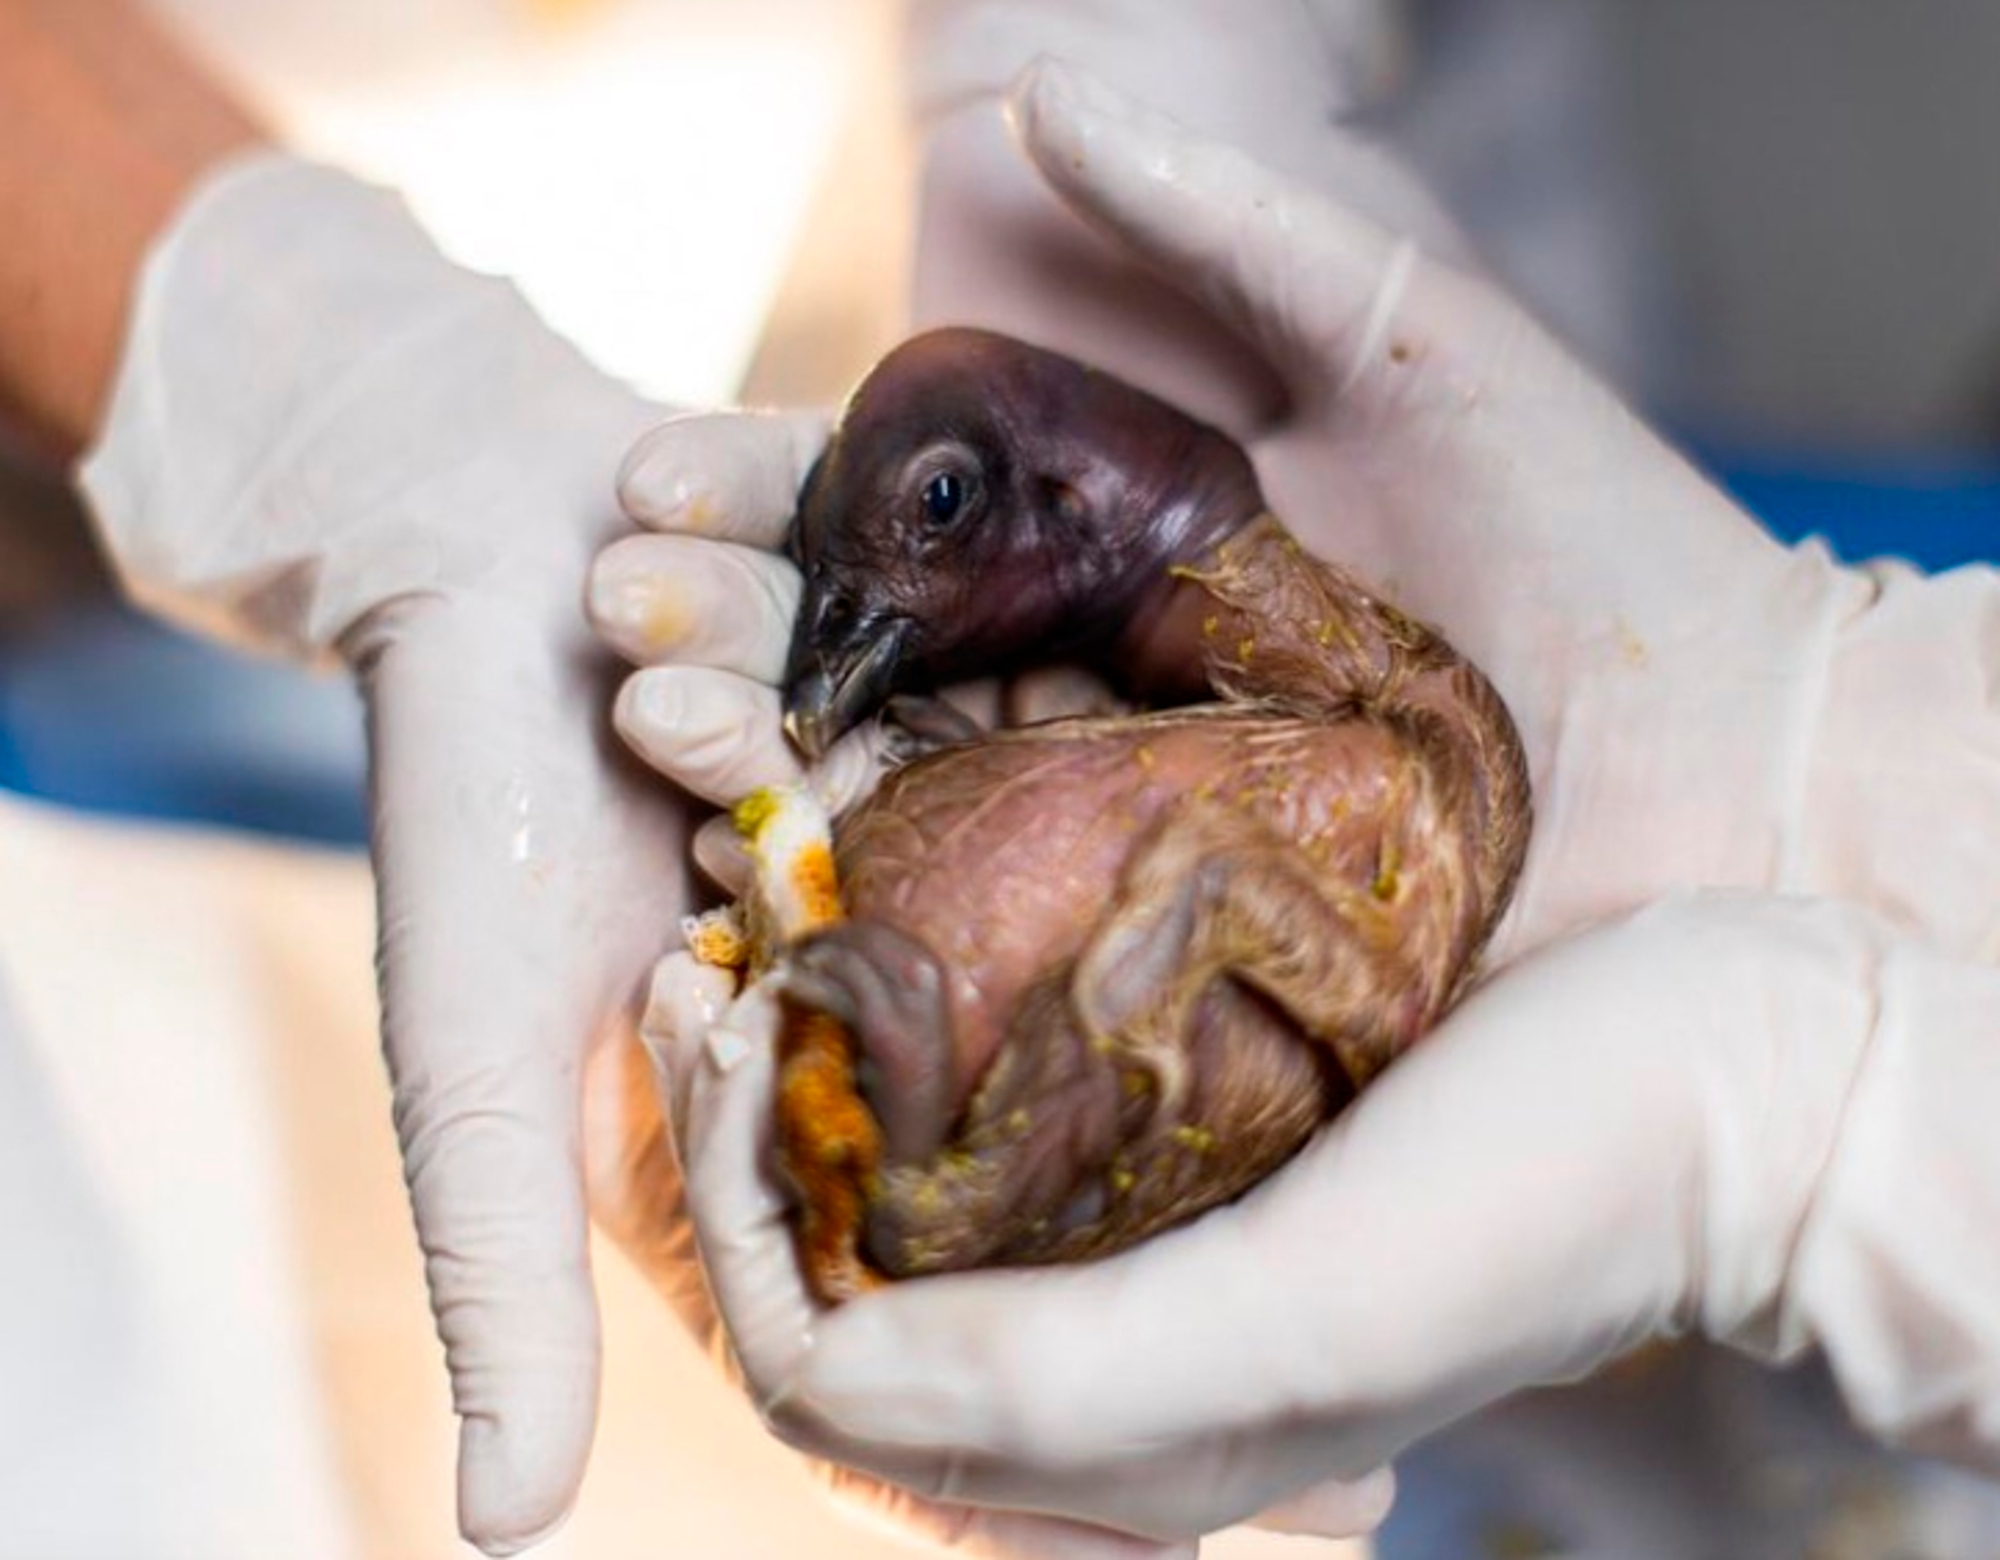 Read more about the article Moment Rare Baby Condor Hatches From Egg